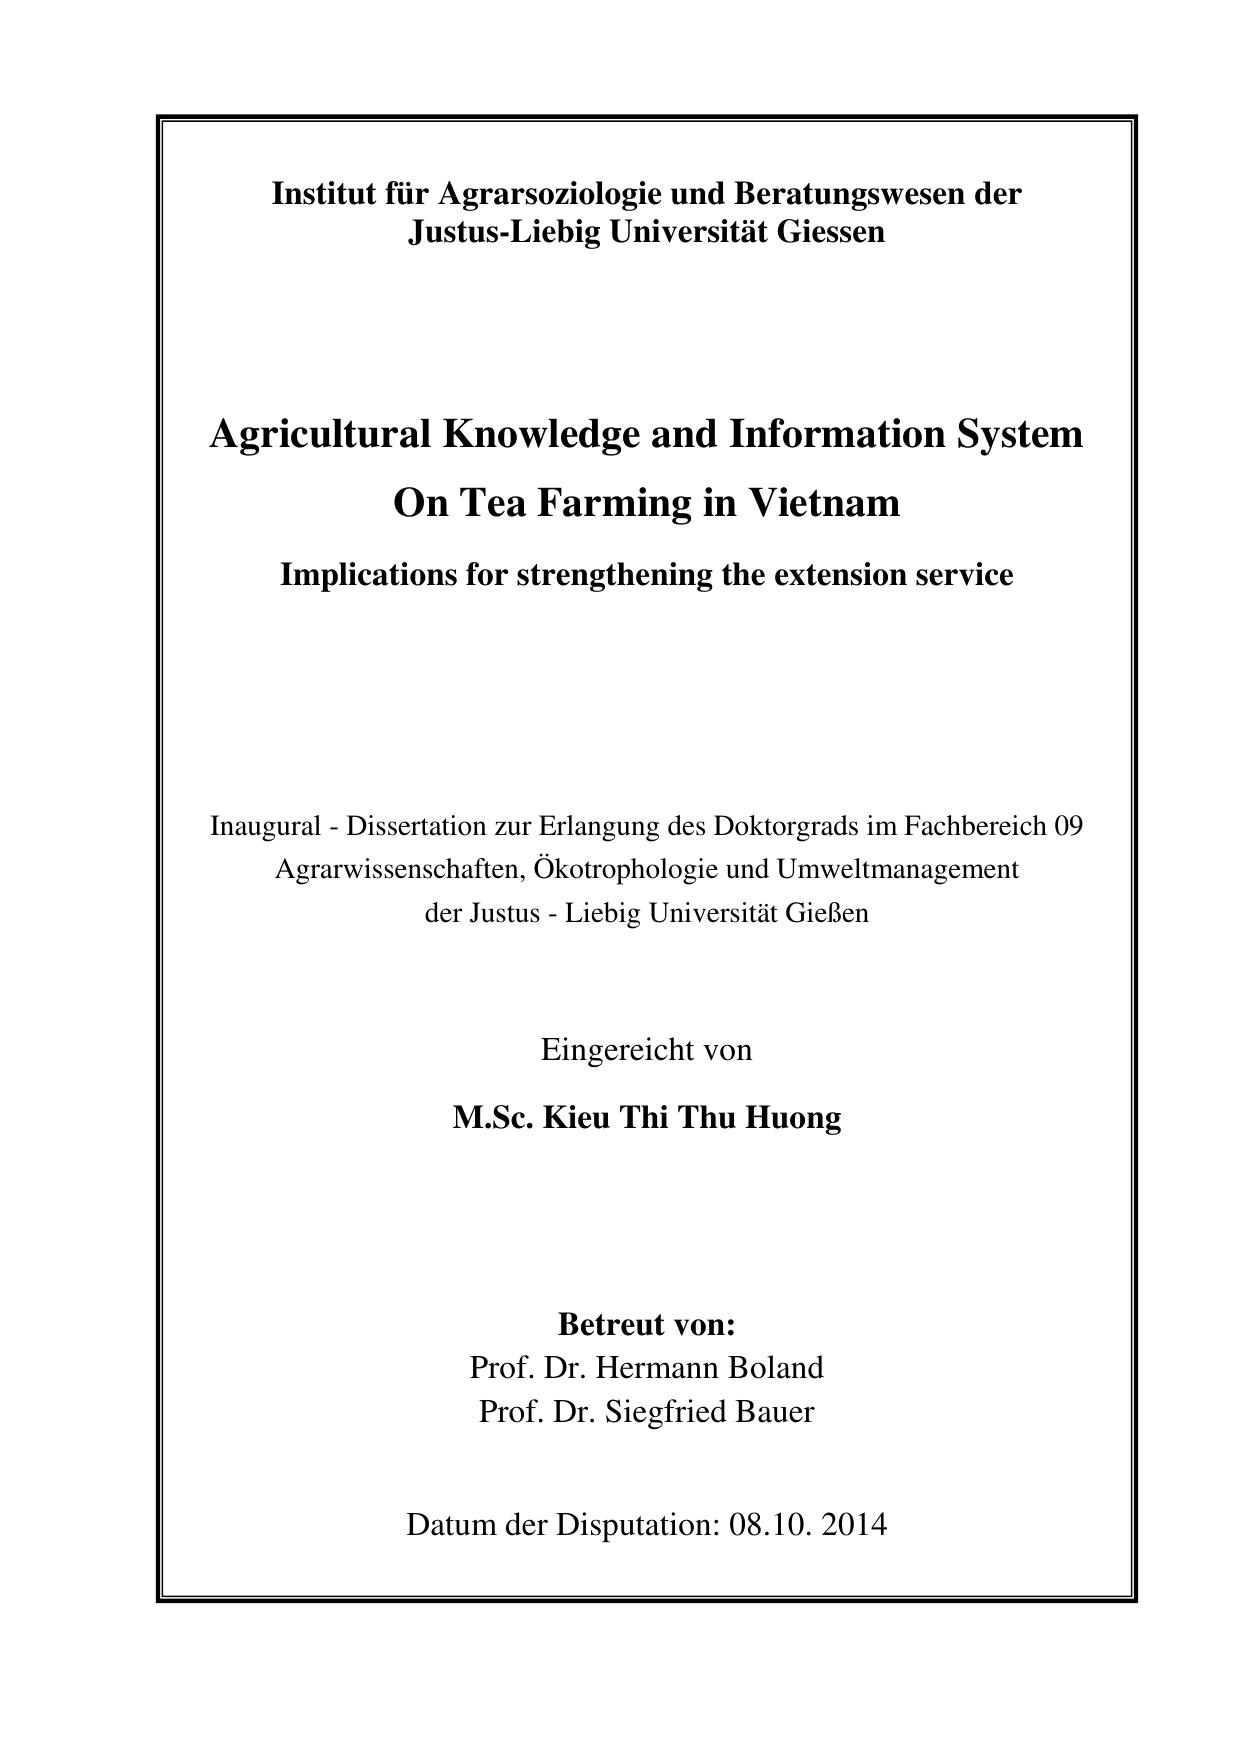 Agricultural knowledge and information system on tea farming in Vietnam : implication for strengthening the extension service